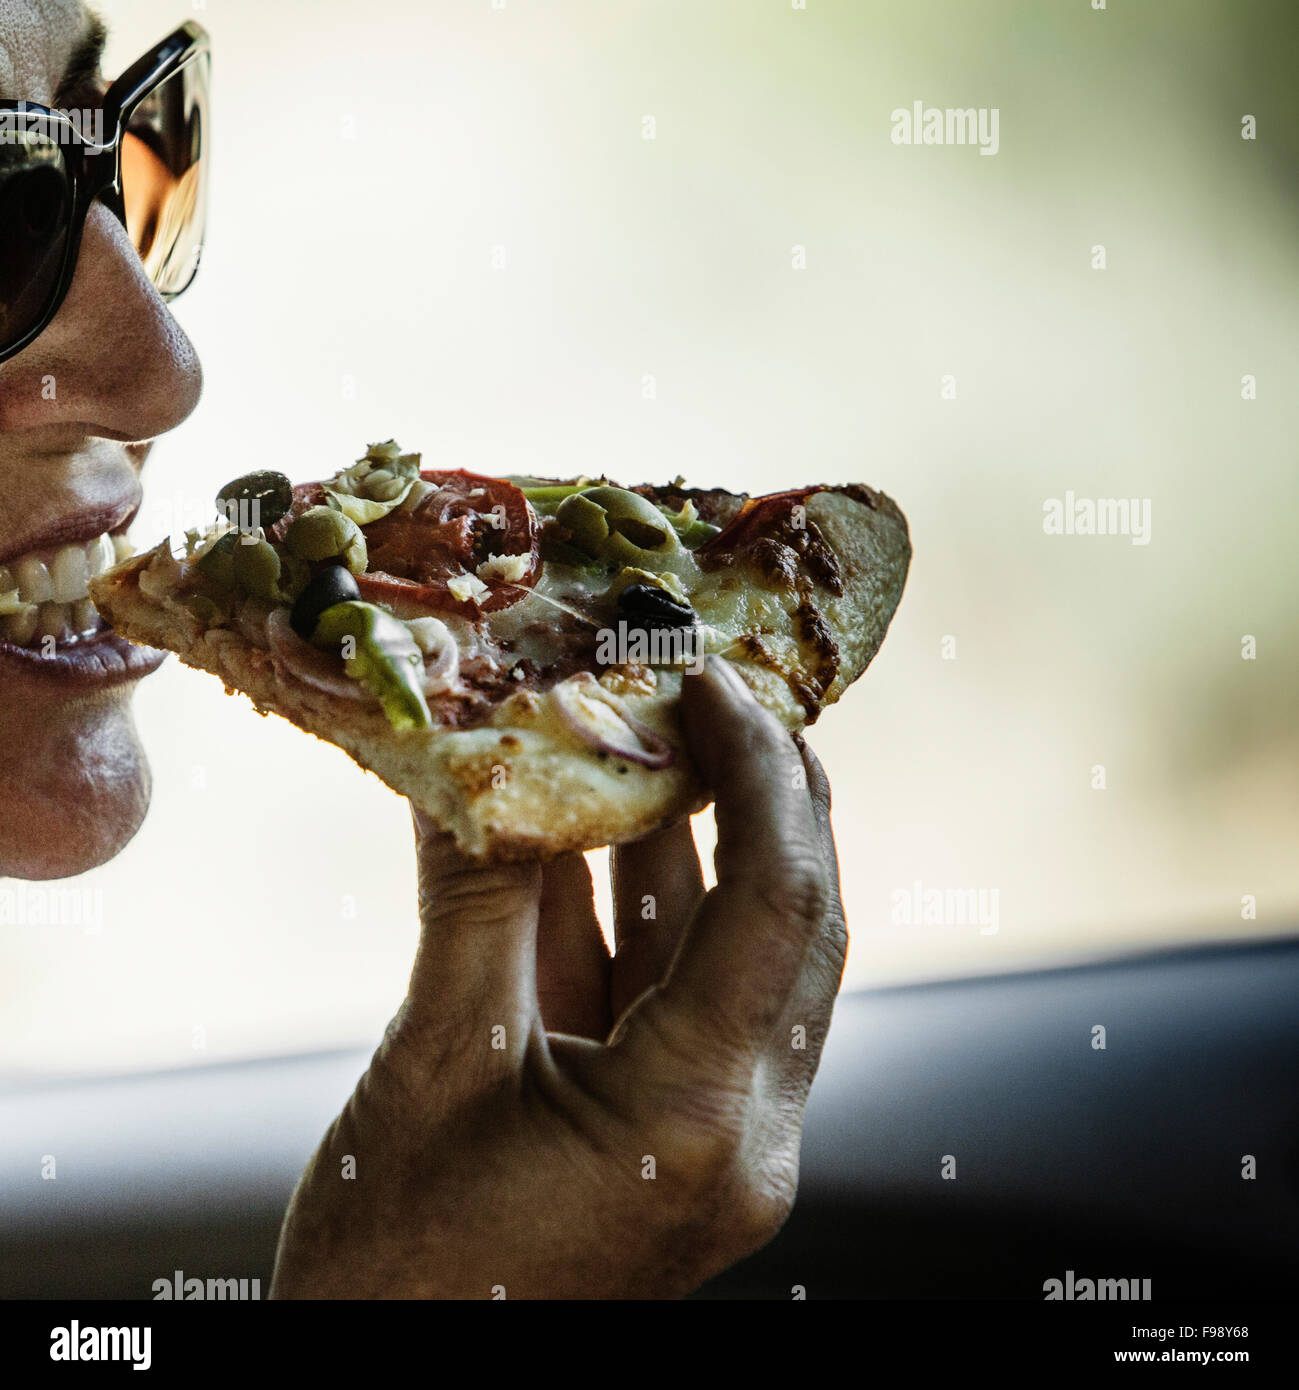 A woman taking a bite of pizza. Stock Photo